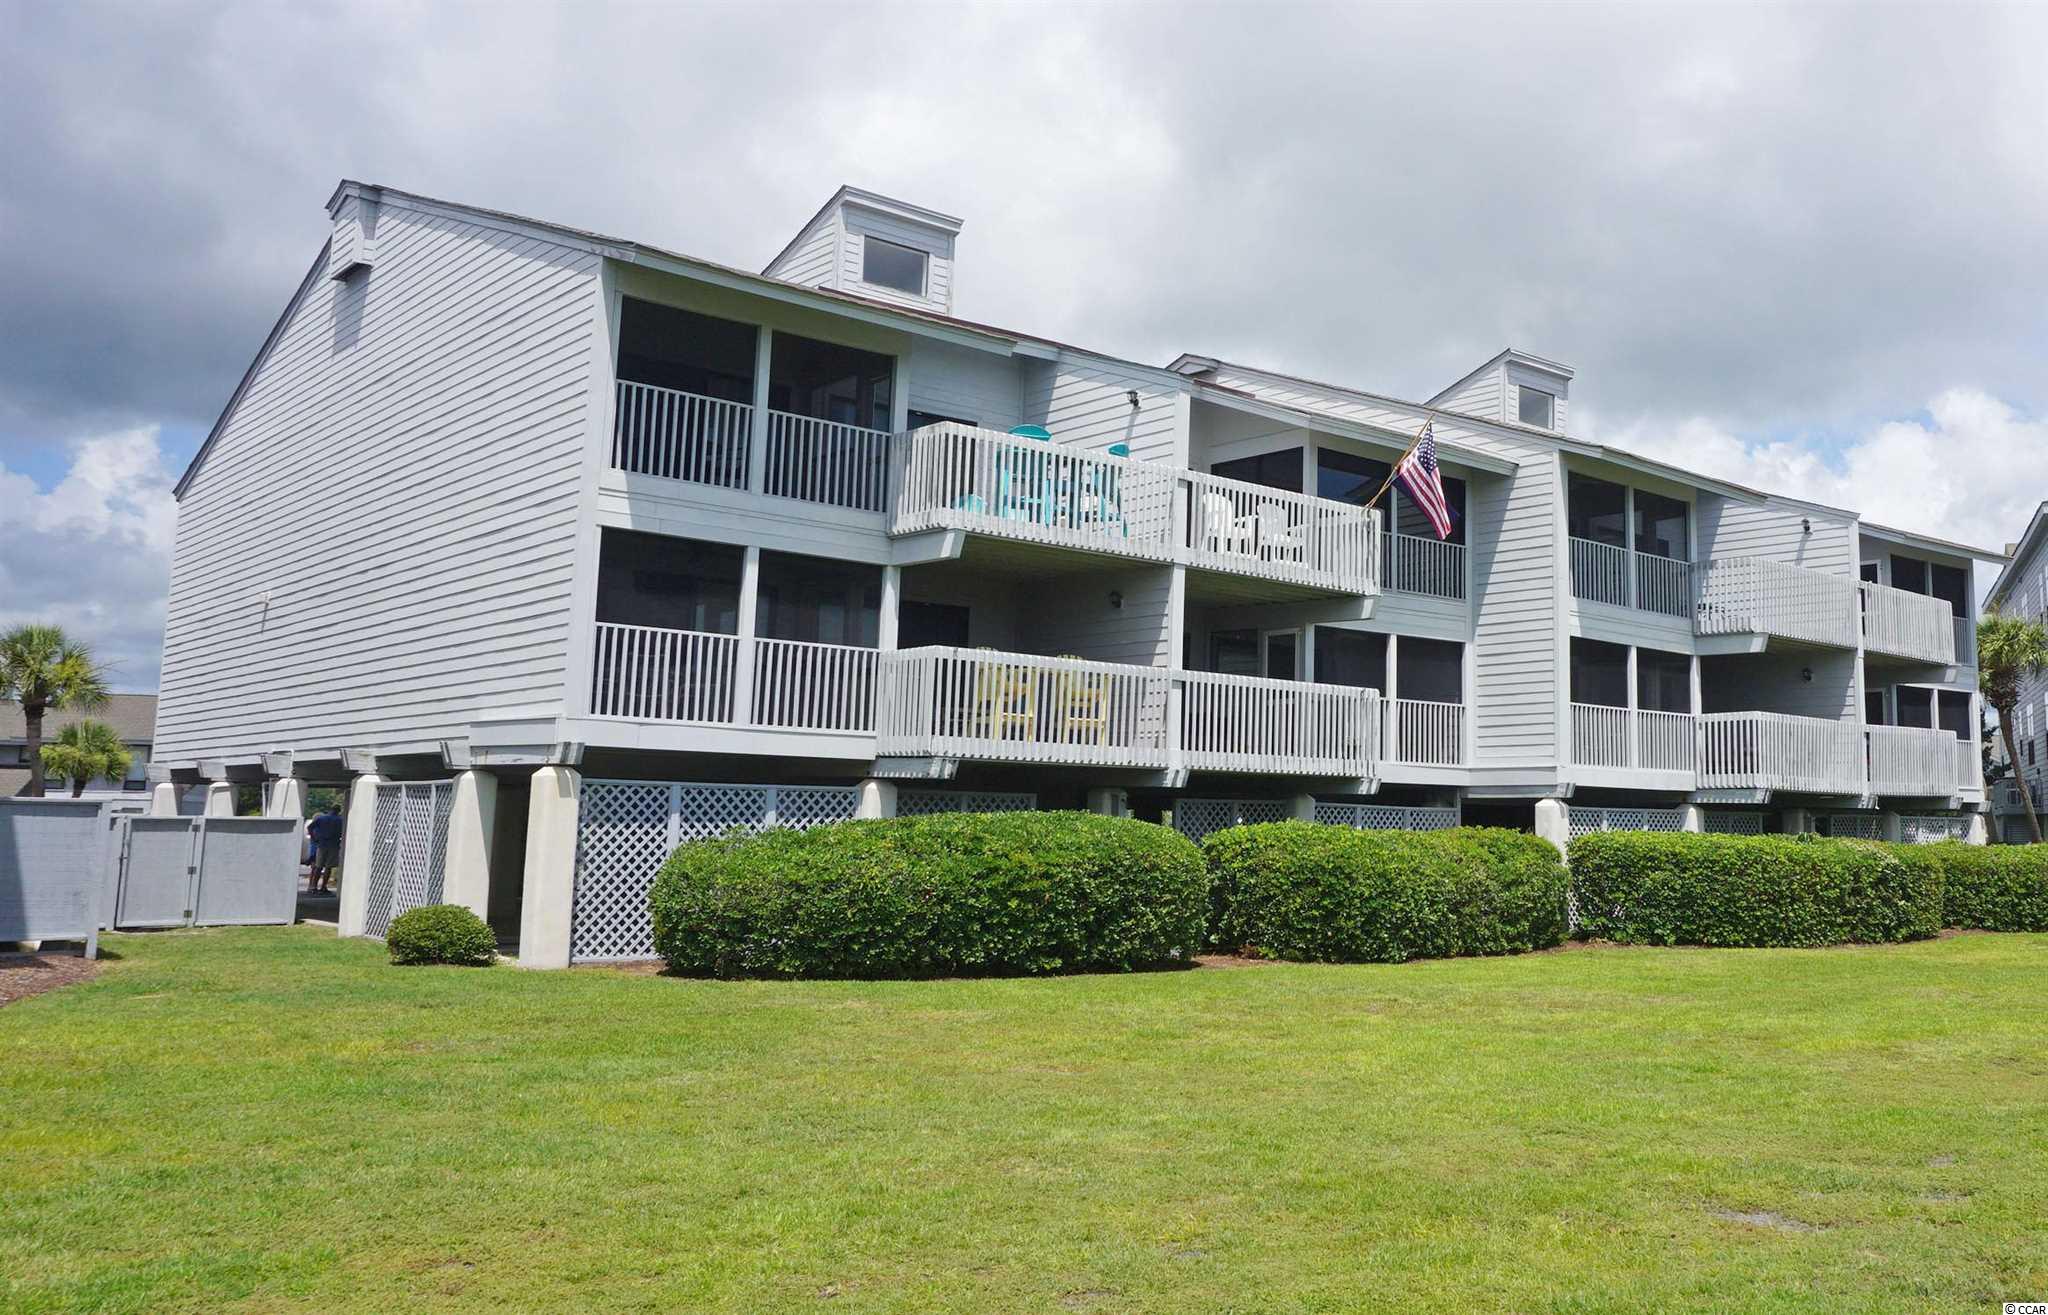 61 - #17D Inlet Point Dr. Pawleys Island, SC 29585